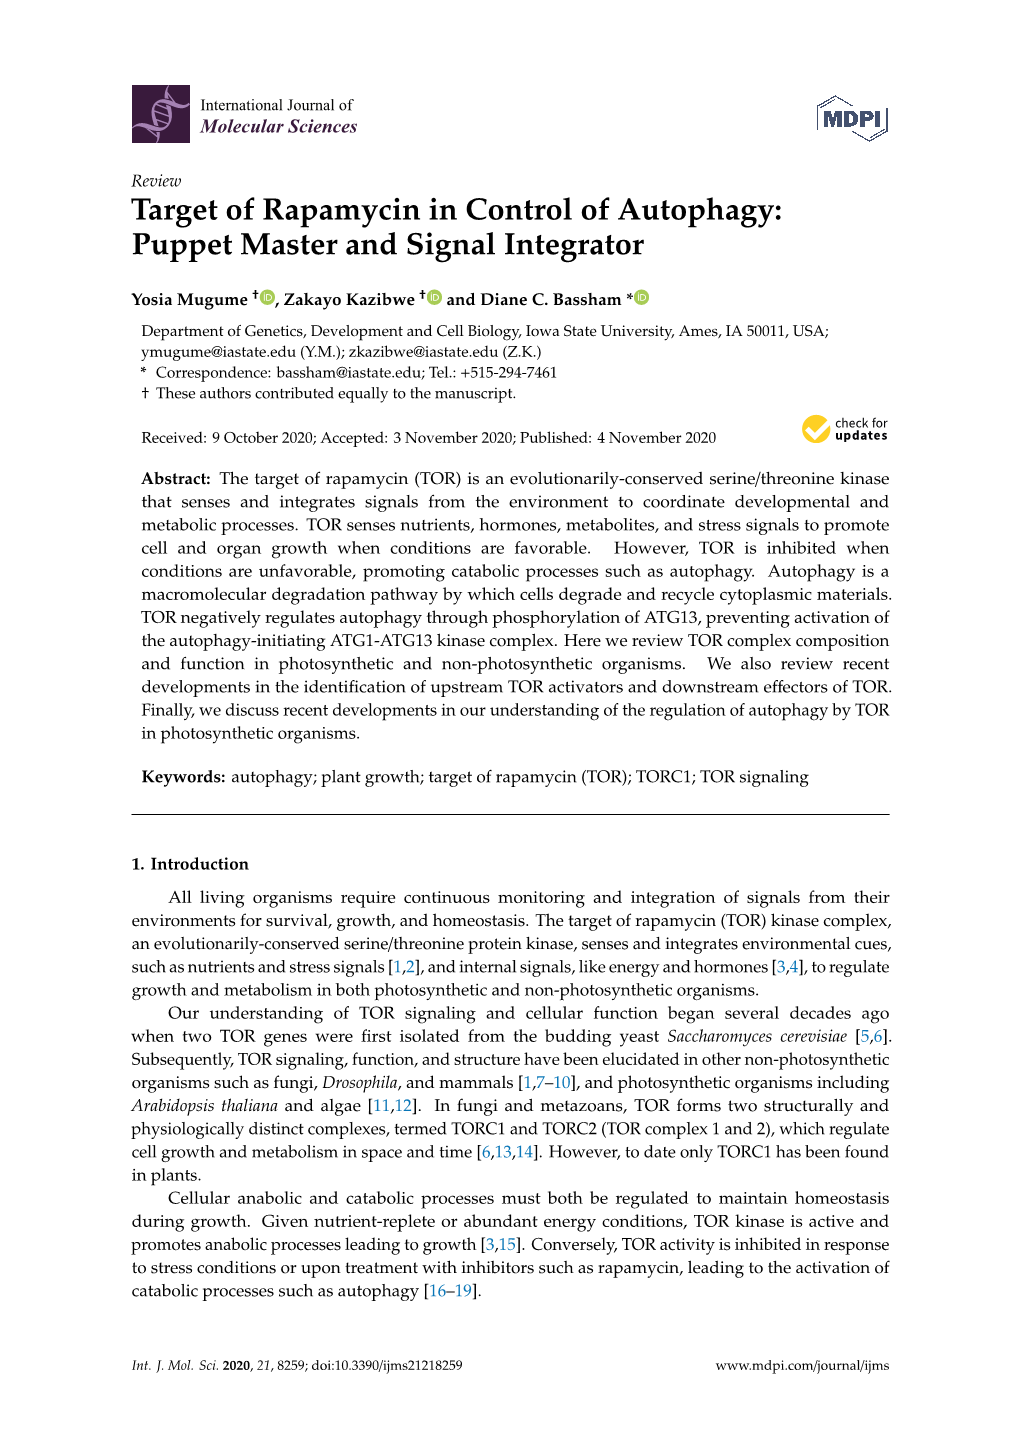 Target of Rapamycin in Control of Autophagy: Puppet Master and Signal Integrator